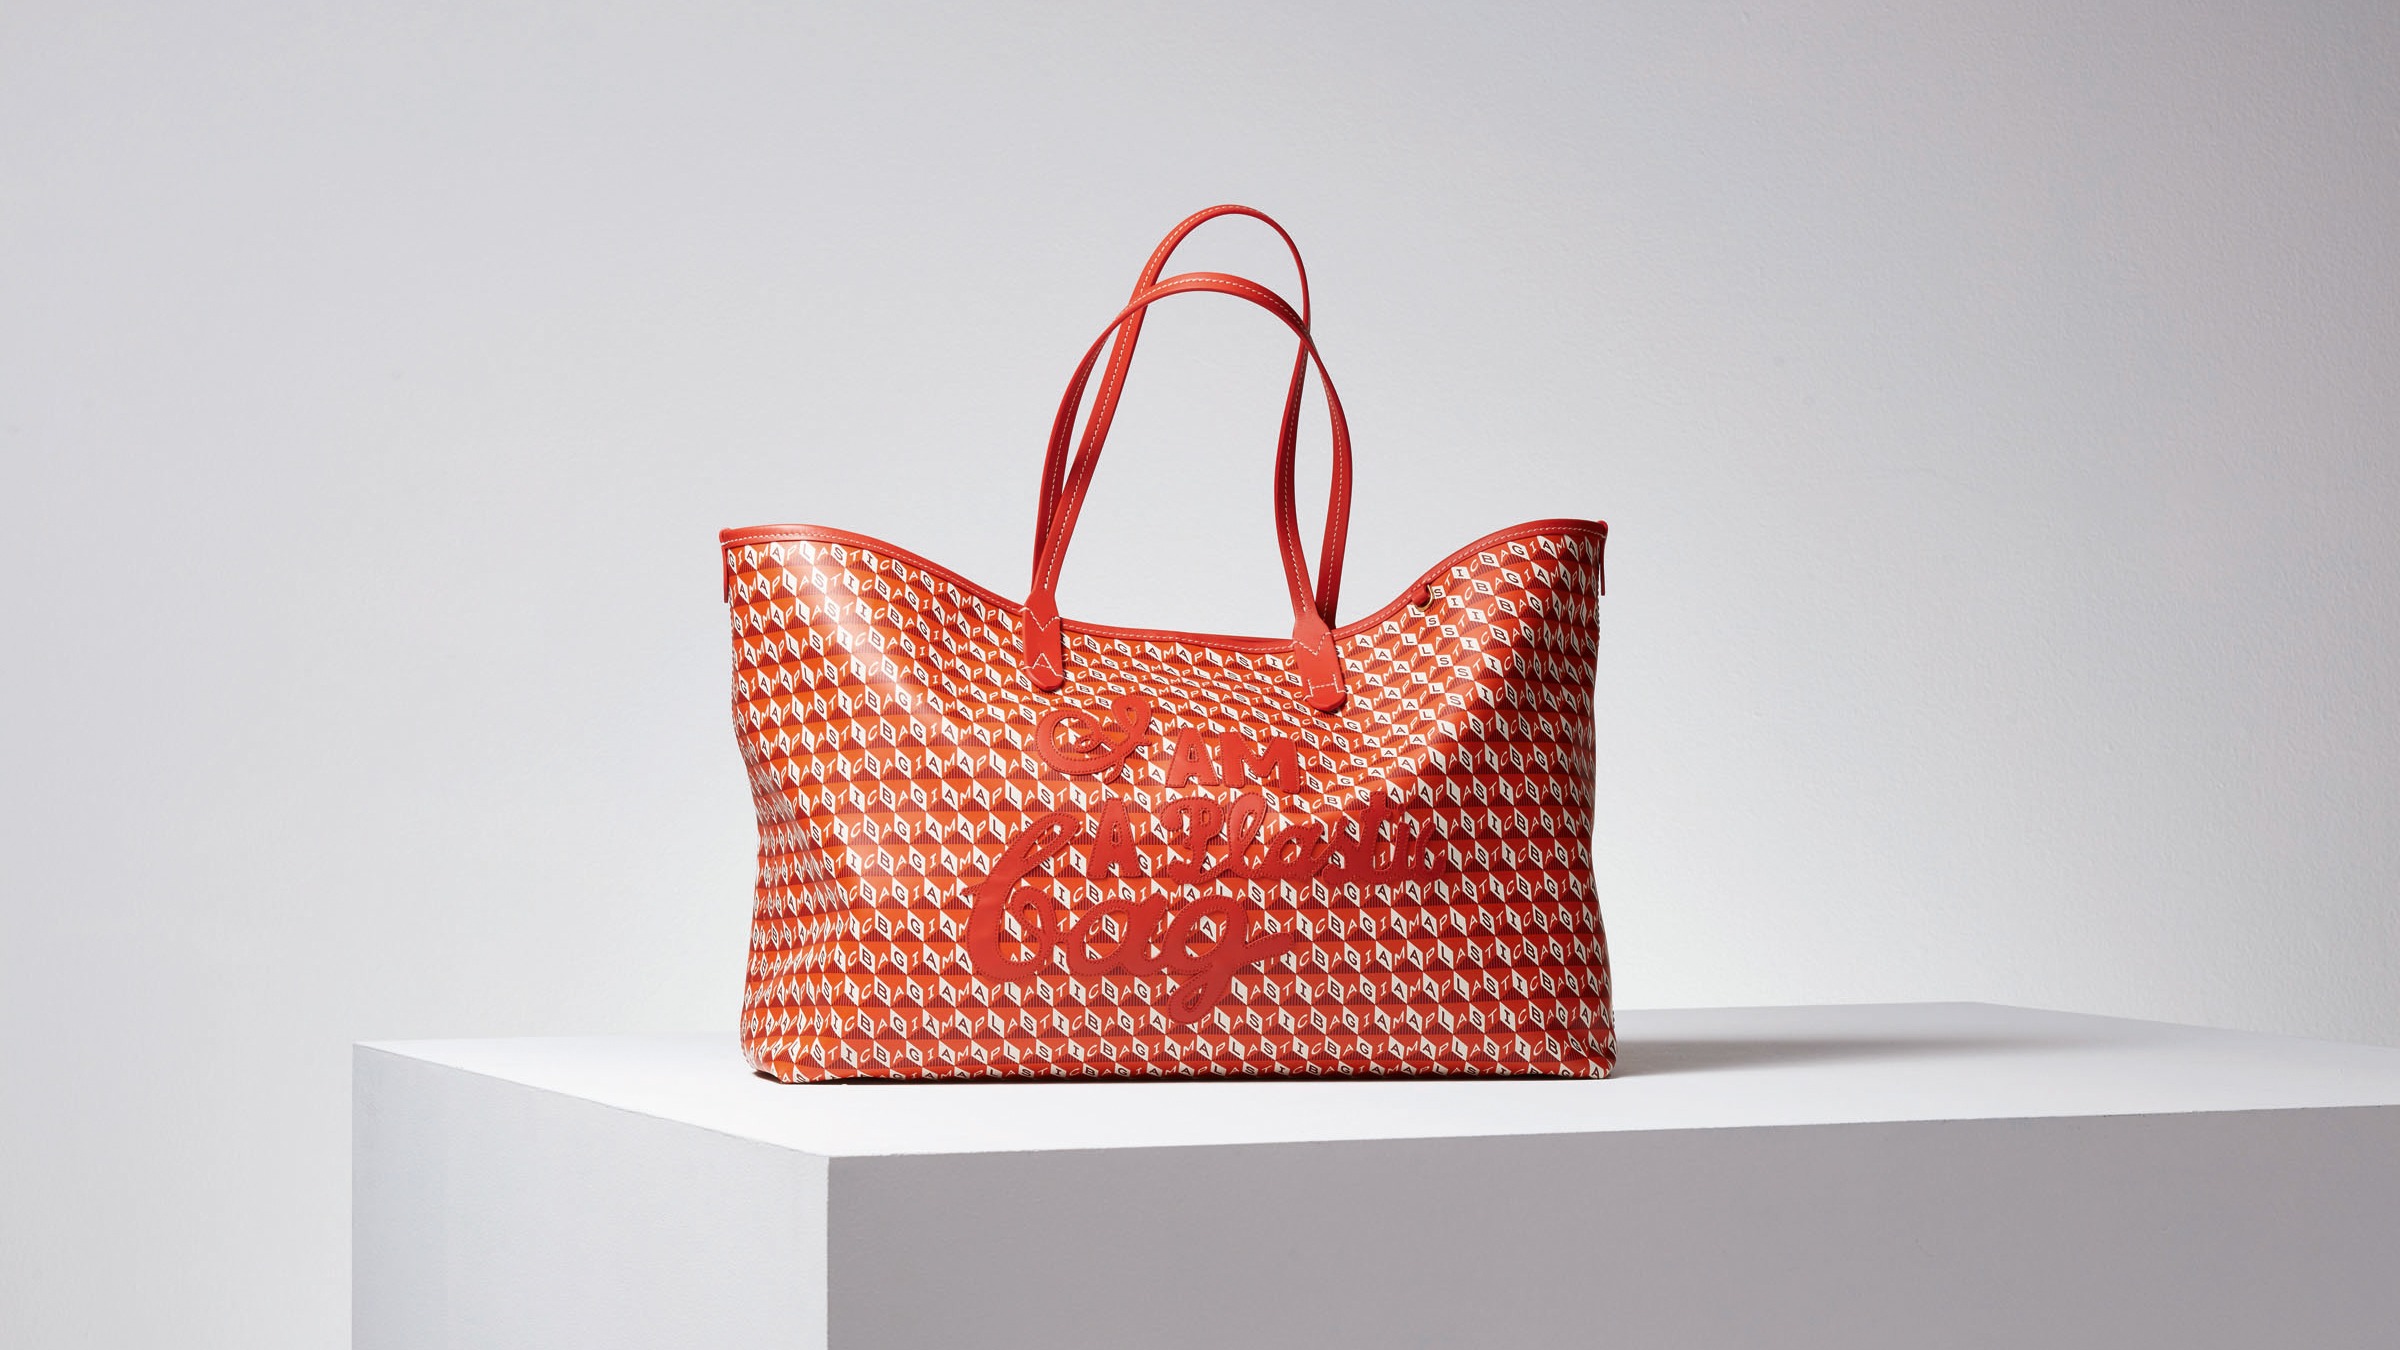 Exclusive: Anya Hindmarch launches I Am a Plastic Bag | Financial